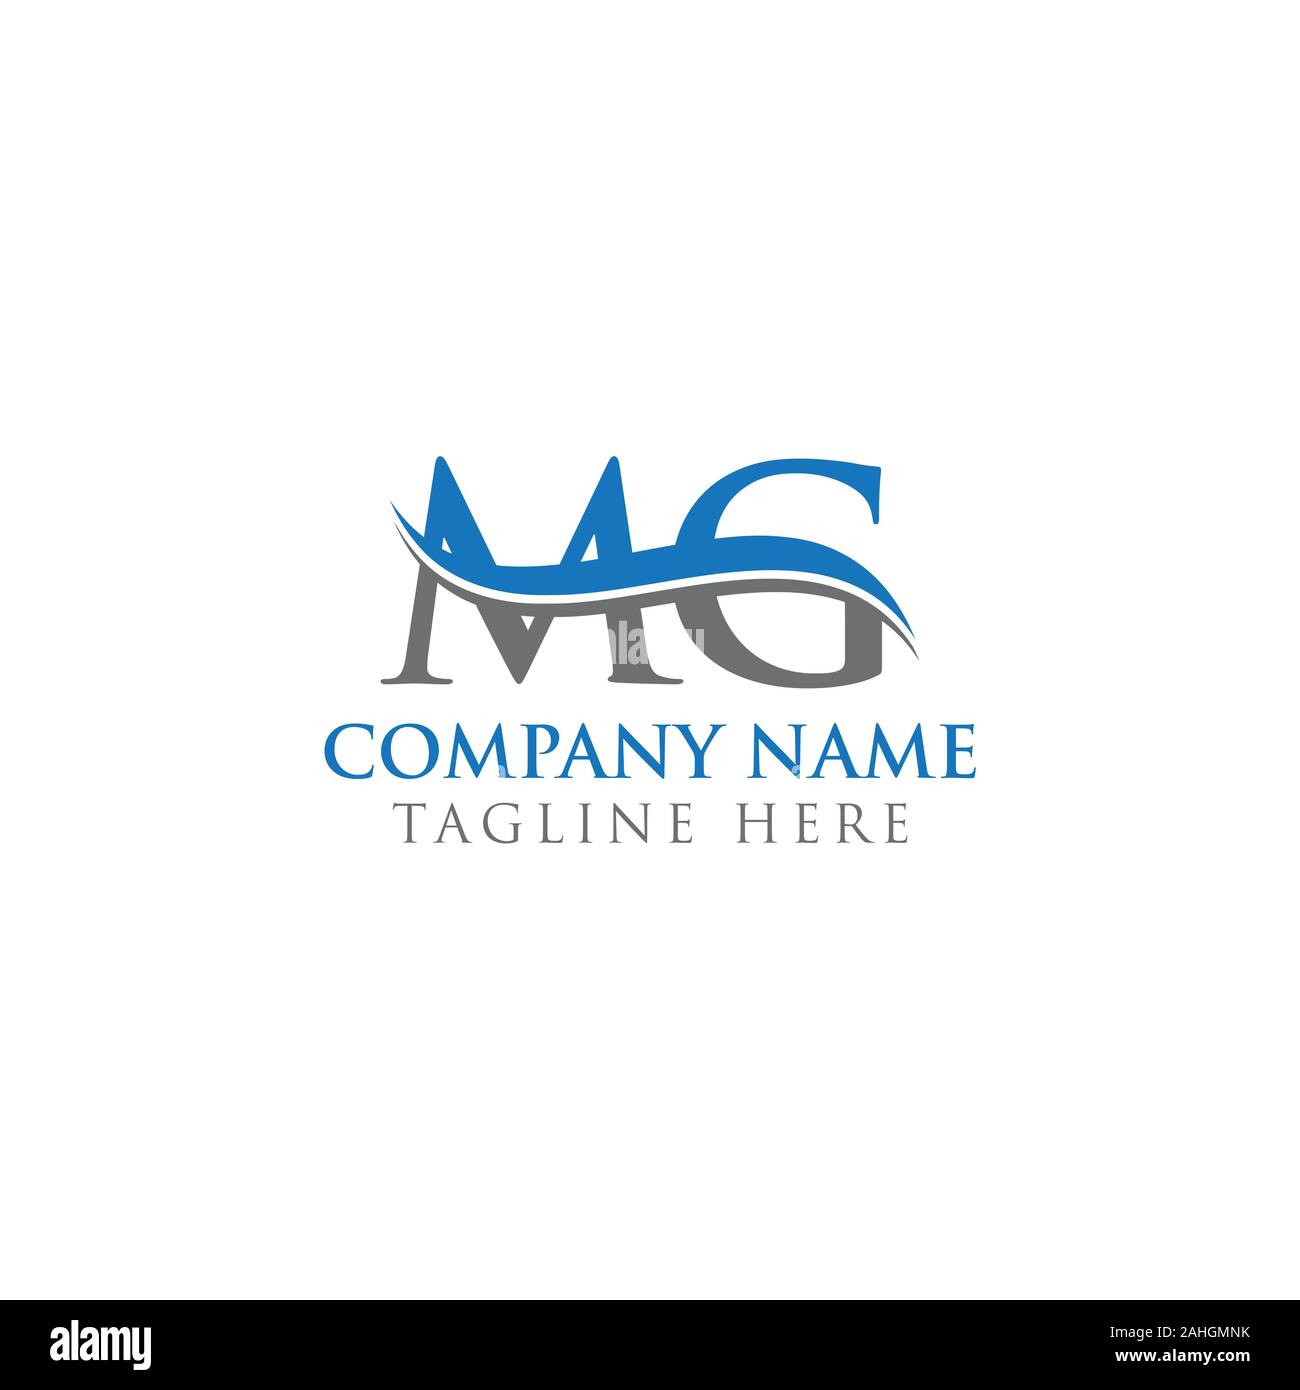 Mg Home And Real Estate Monogram Logo Branding Typography Company Vector,  Branding, Typography, Company PNG and Vector with Transparent Background  for Free Download